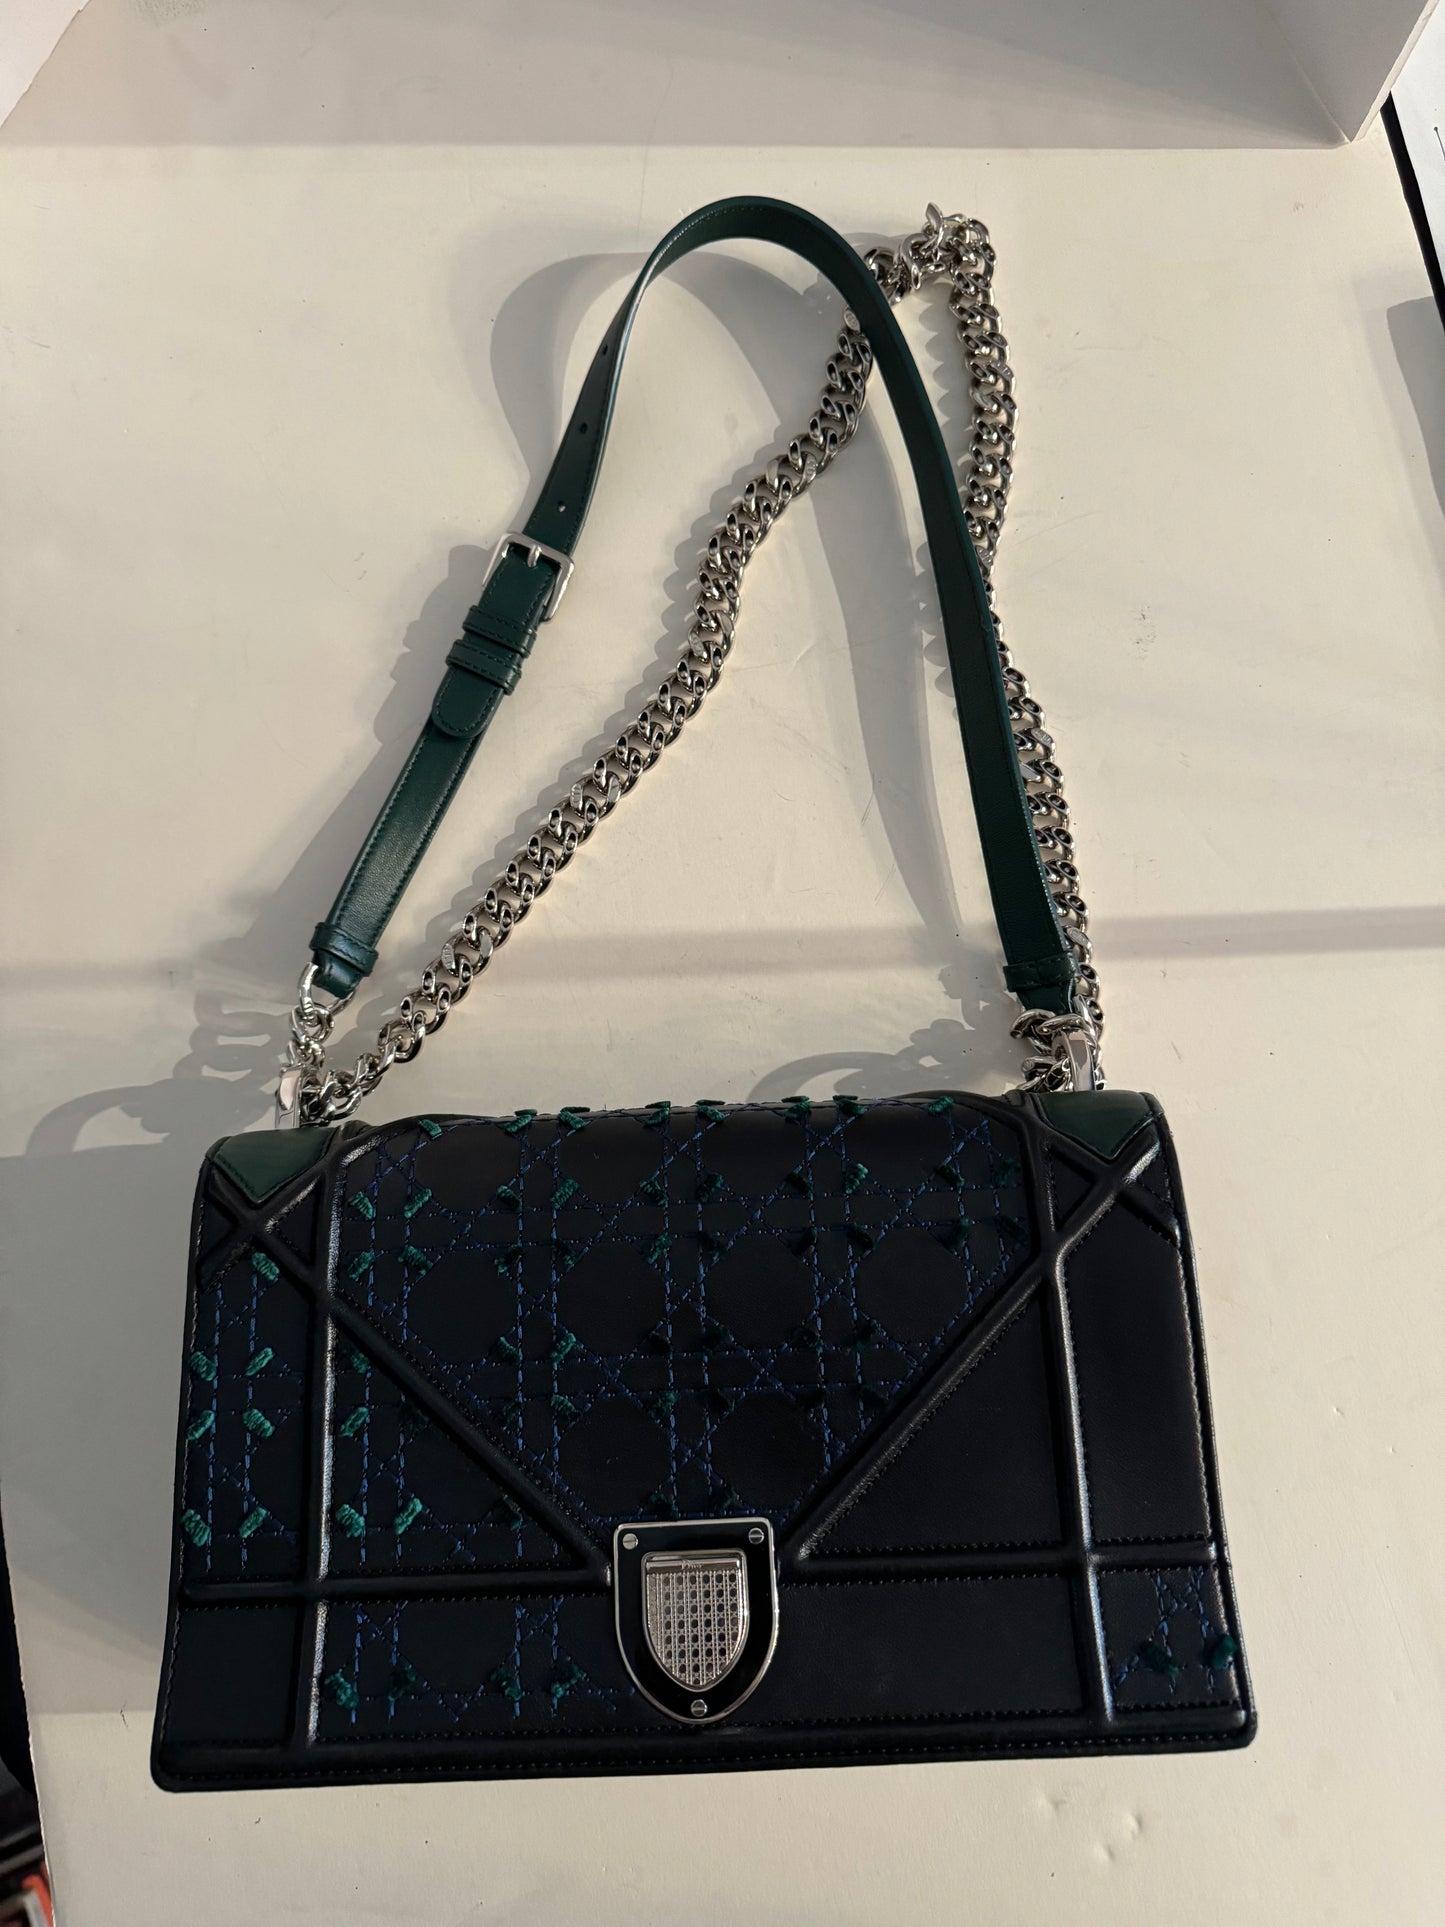 Chanel cross body bag with chain top handle and leather / chain cross body strap